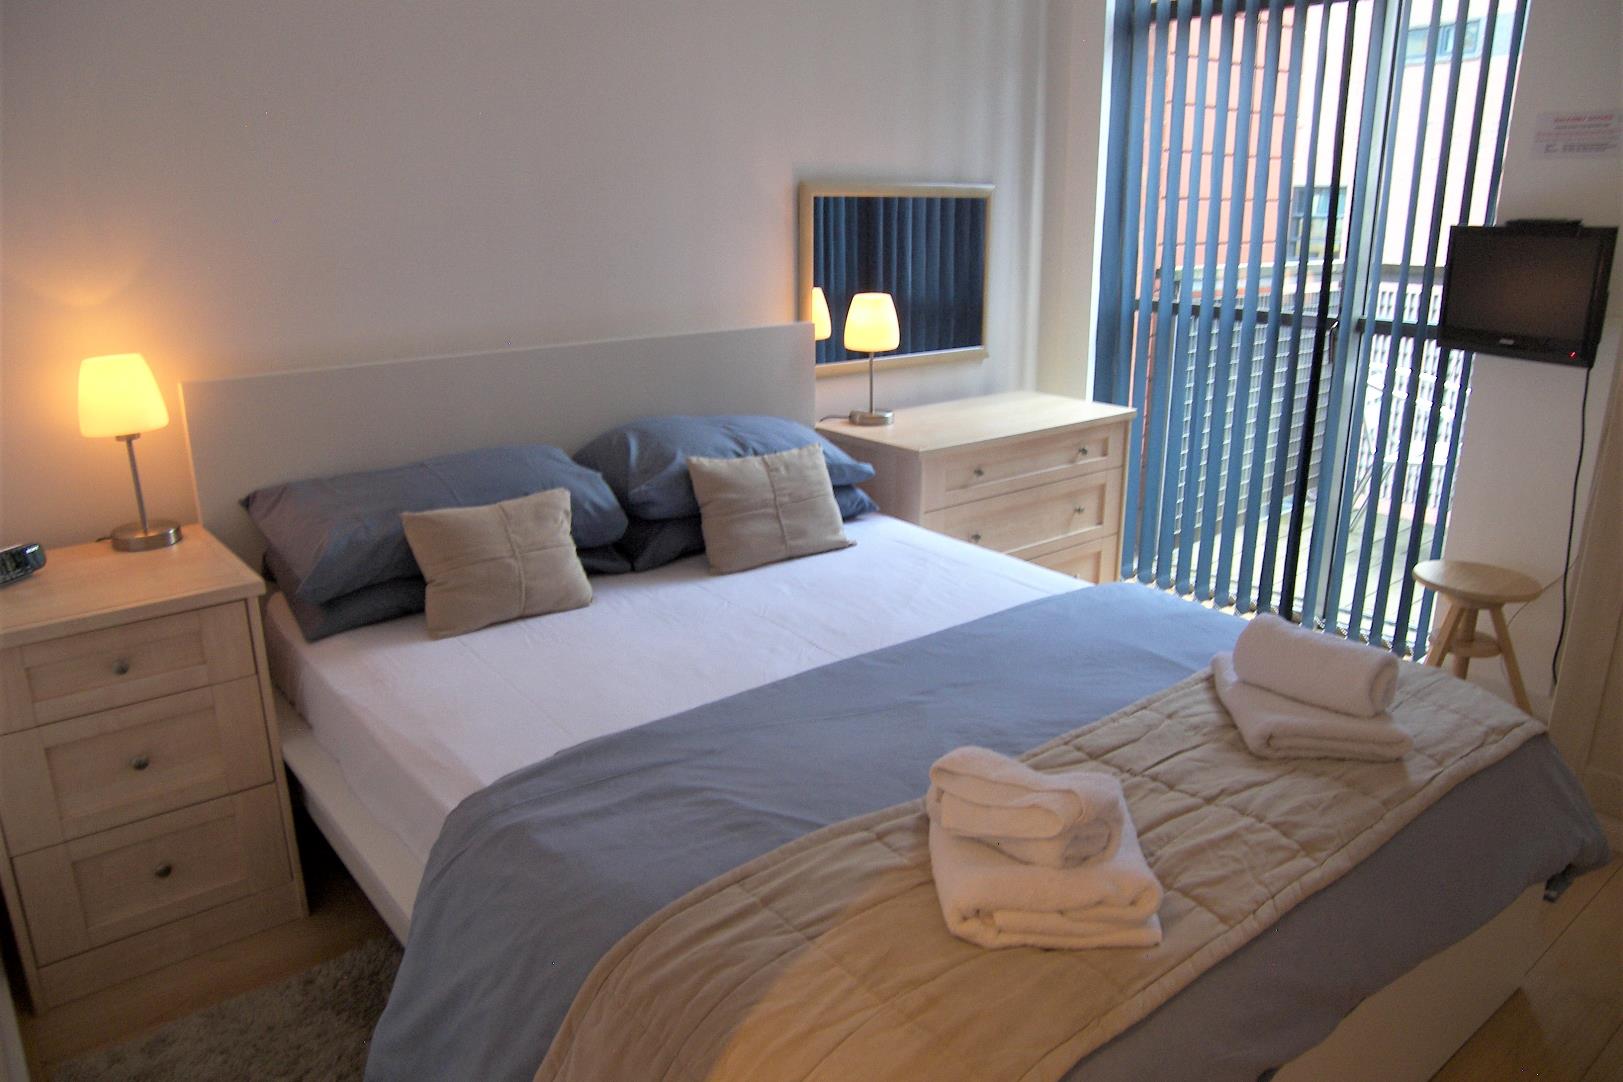 Our-Corporate-Apartments-Manchester-have-private-balconies,-Wifi,-Smart-TVs-and-king-size-beds.-Book-your-Manchester-accommodation-now!